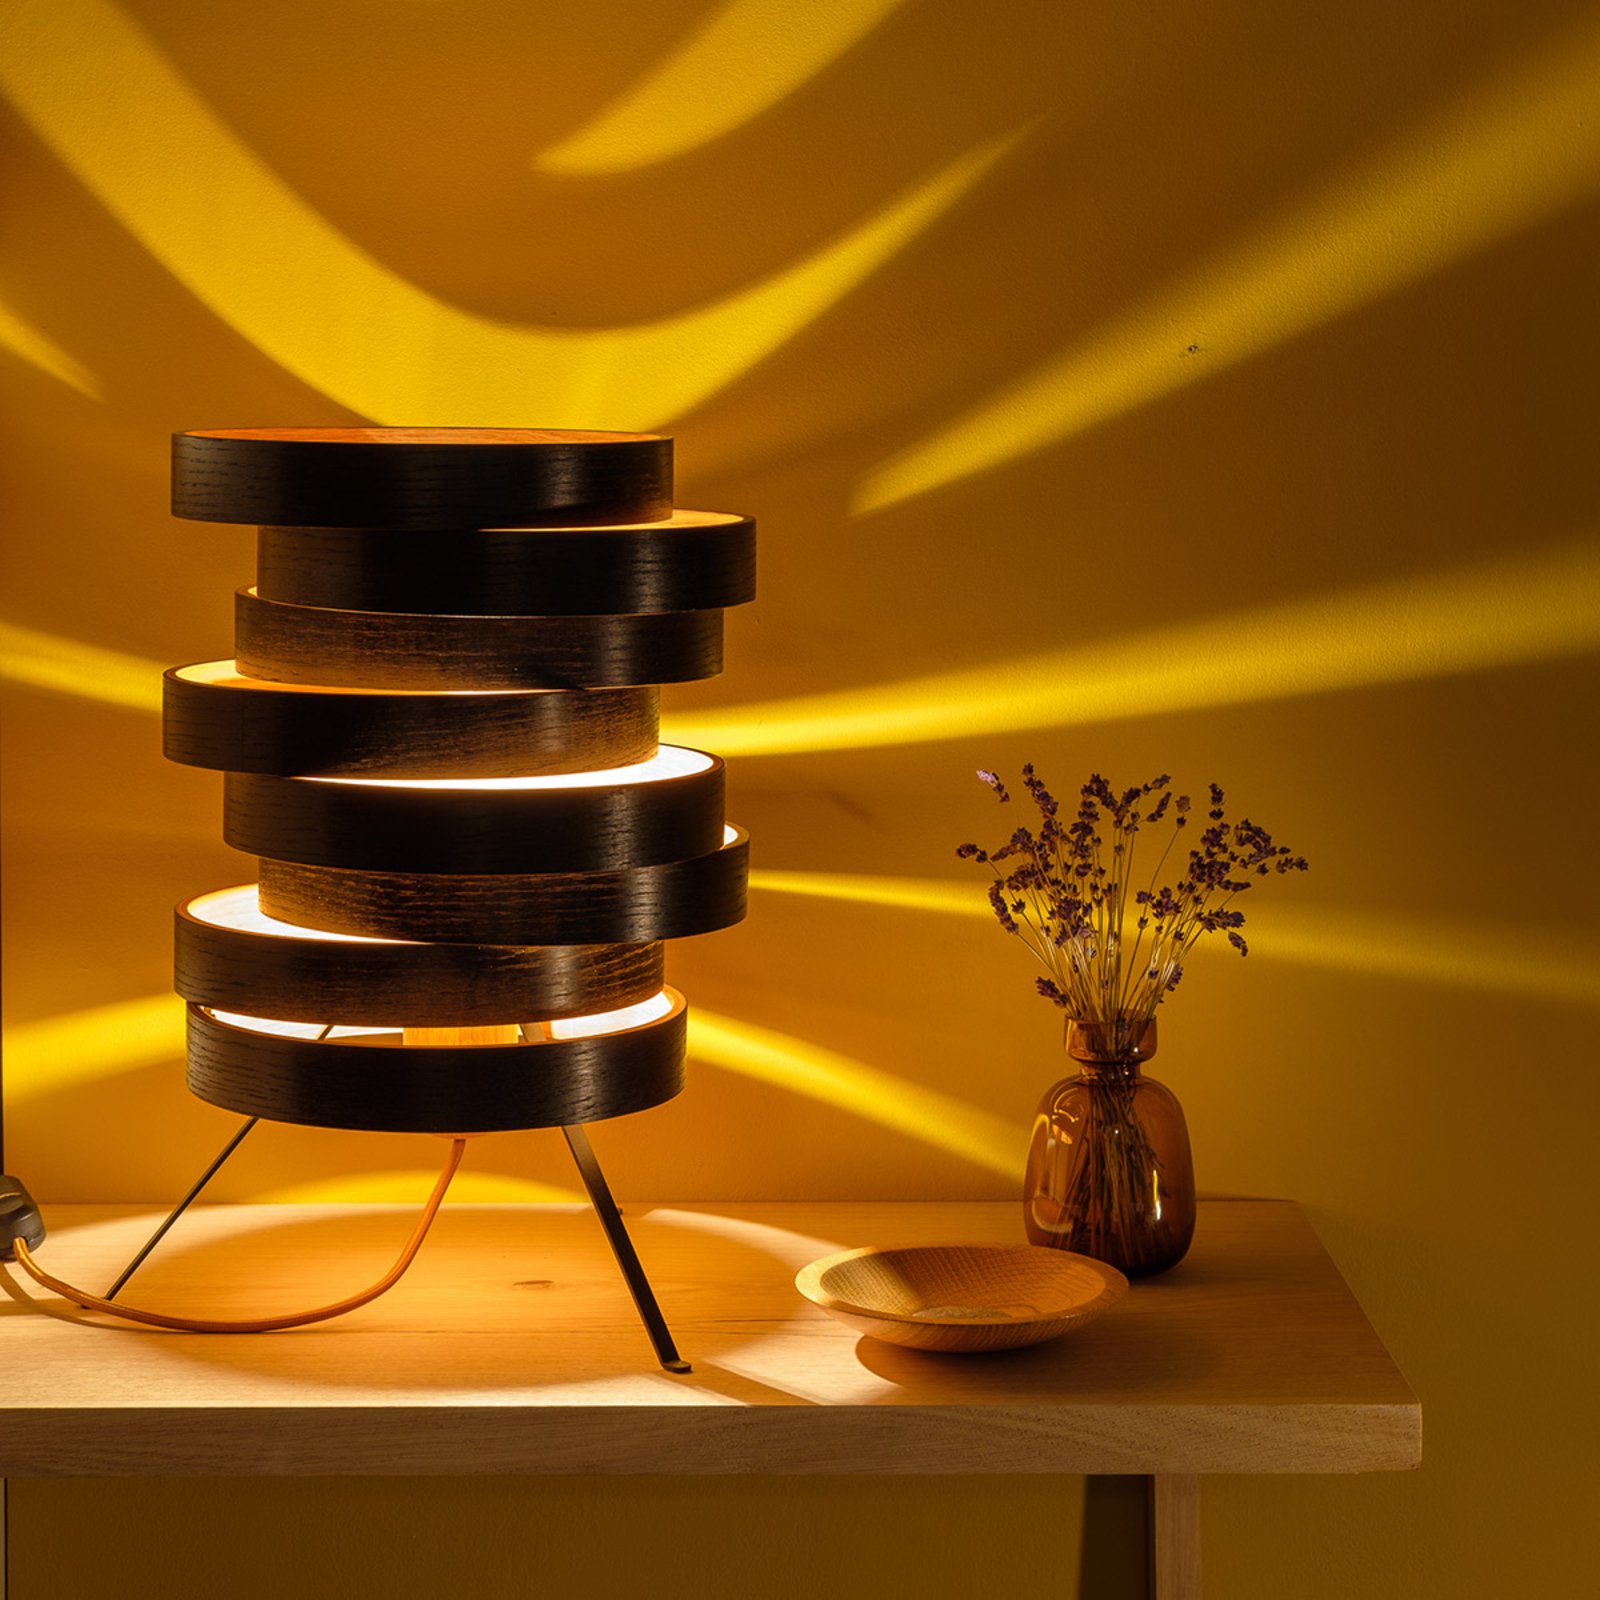 Cloq table lamp with a wooden lampshade